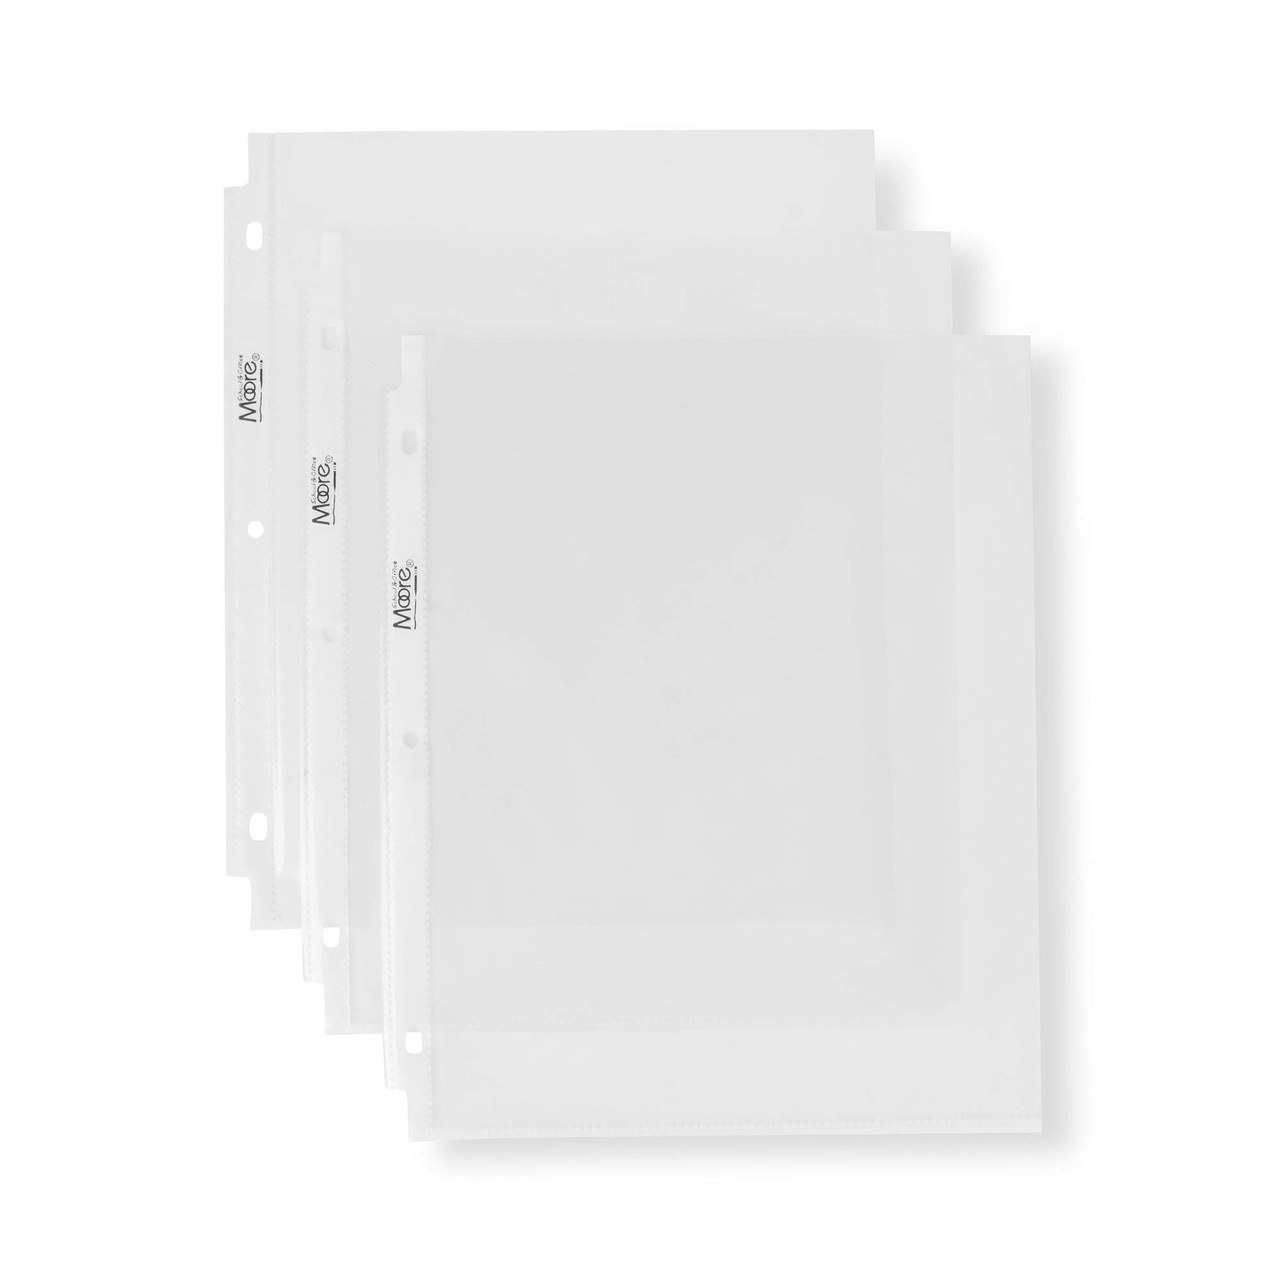 Moore Sheet Protectors, Holds 8.5 x 11 inch Sheets, Clear, Reinforced, Fit  Standard 3 Ring Binders, Acid-Free, Archival Safe for Documents and Photos  (200 Sheets) - Toys 4 U